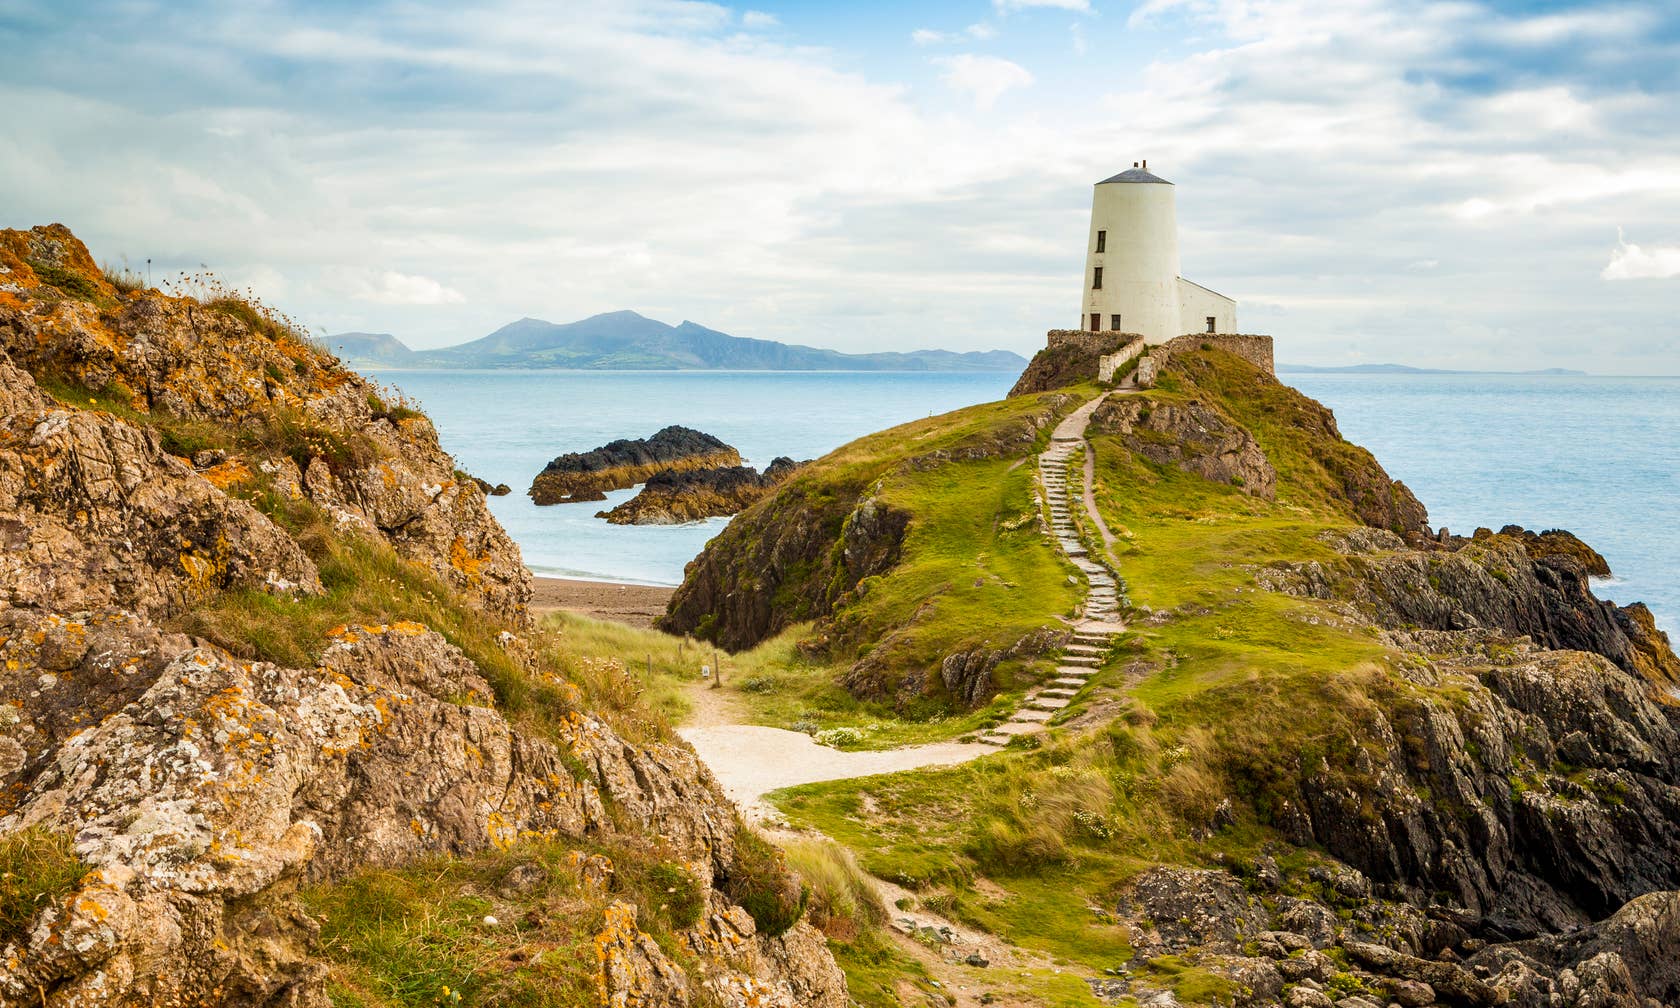 Vacation rentals in Isle of Anglesey